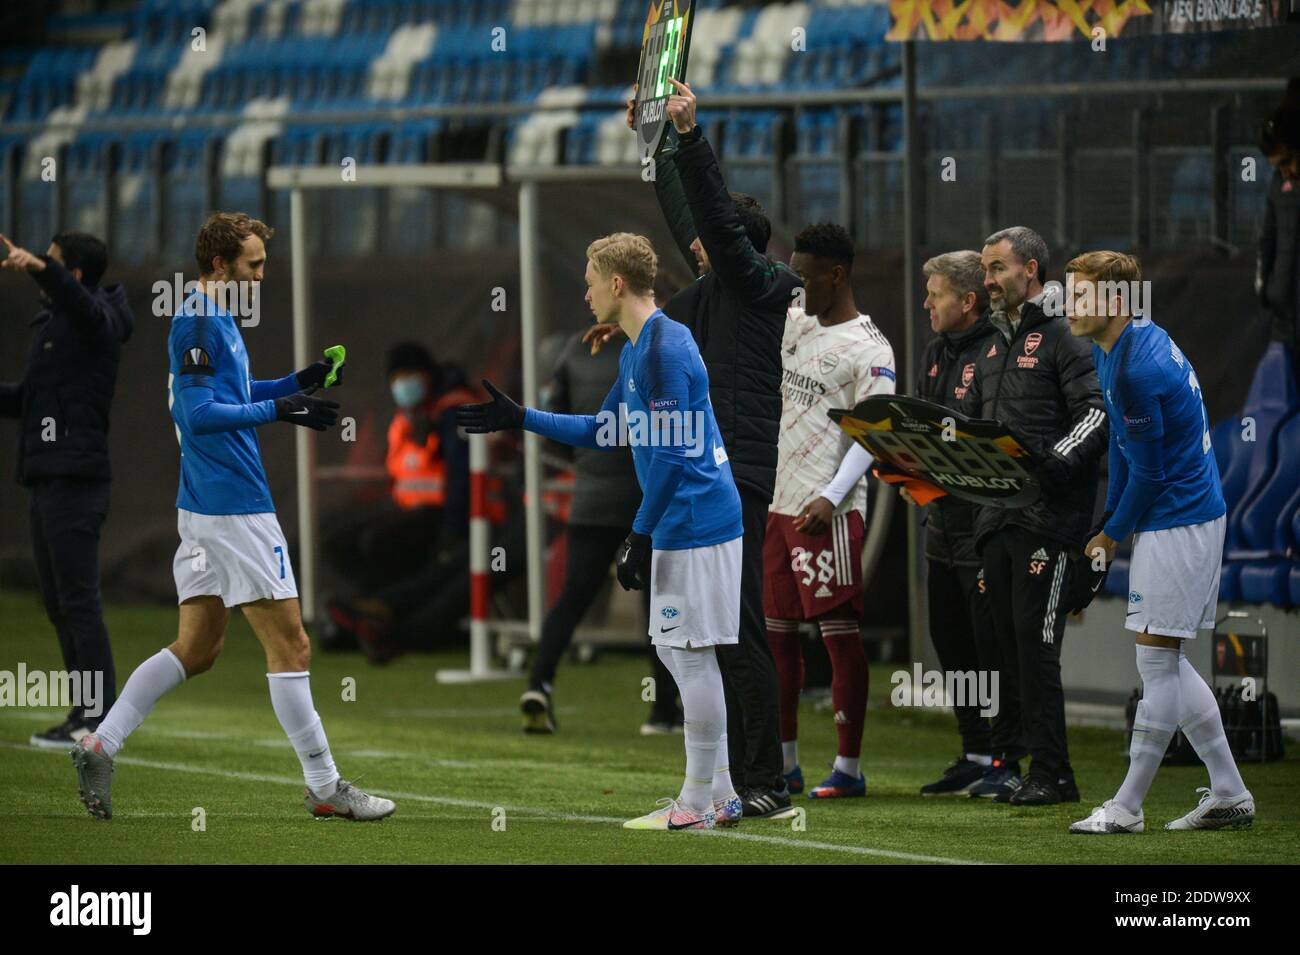 MOLDE, NORWAY - NOVEMBER 26: Substitute Ola Brynhildsen comes on for Magnus Wolff Eikrem of Molde FK during the UEFA Europa League Group B stage match between Molde FK and Arsenal FC at Molde Stadion on November 26, 2020 in Molde, Norway. (Photo by Erik Birkeland/MB Media) Stock Photo